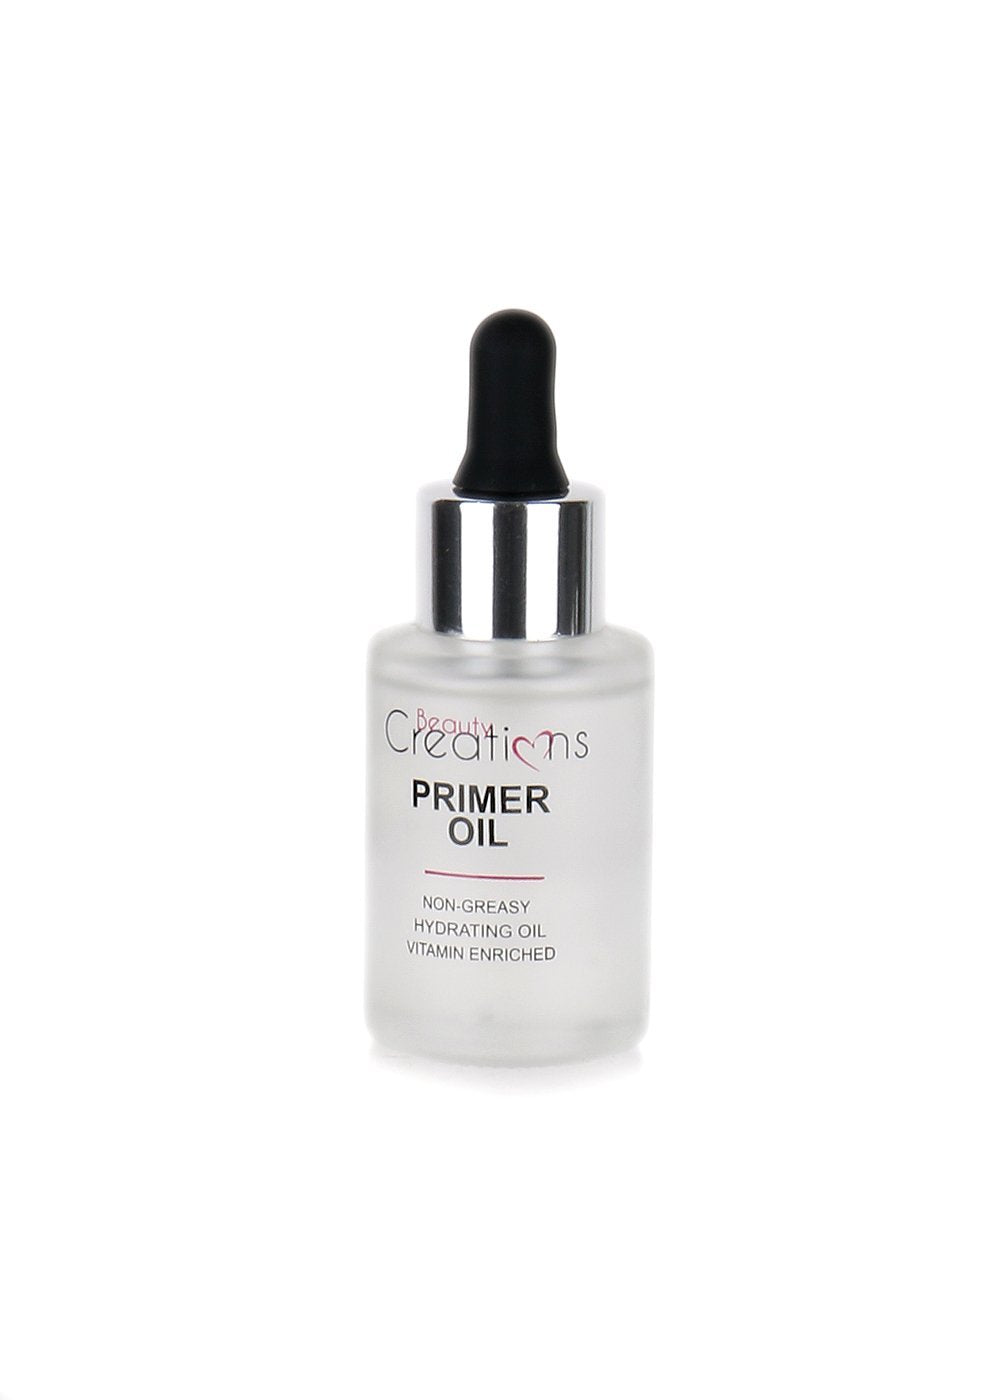 Beauty Creations primer oil